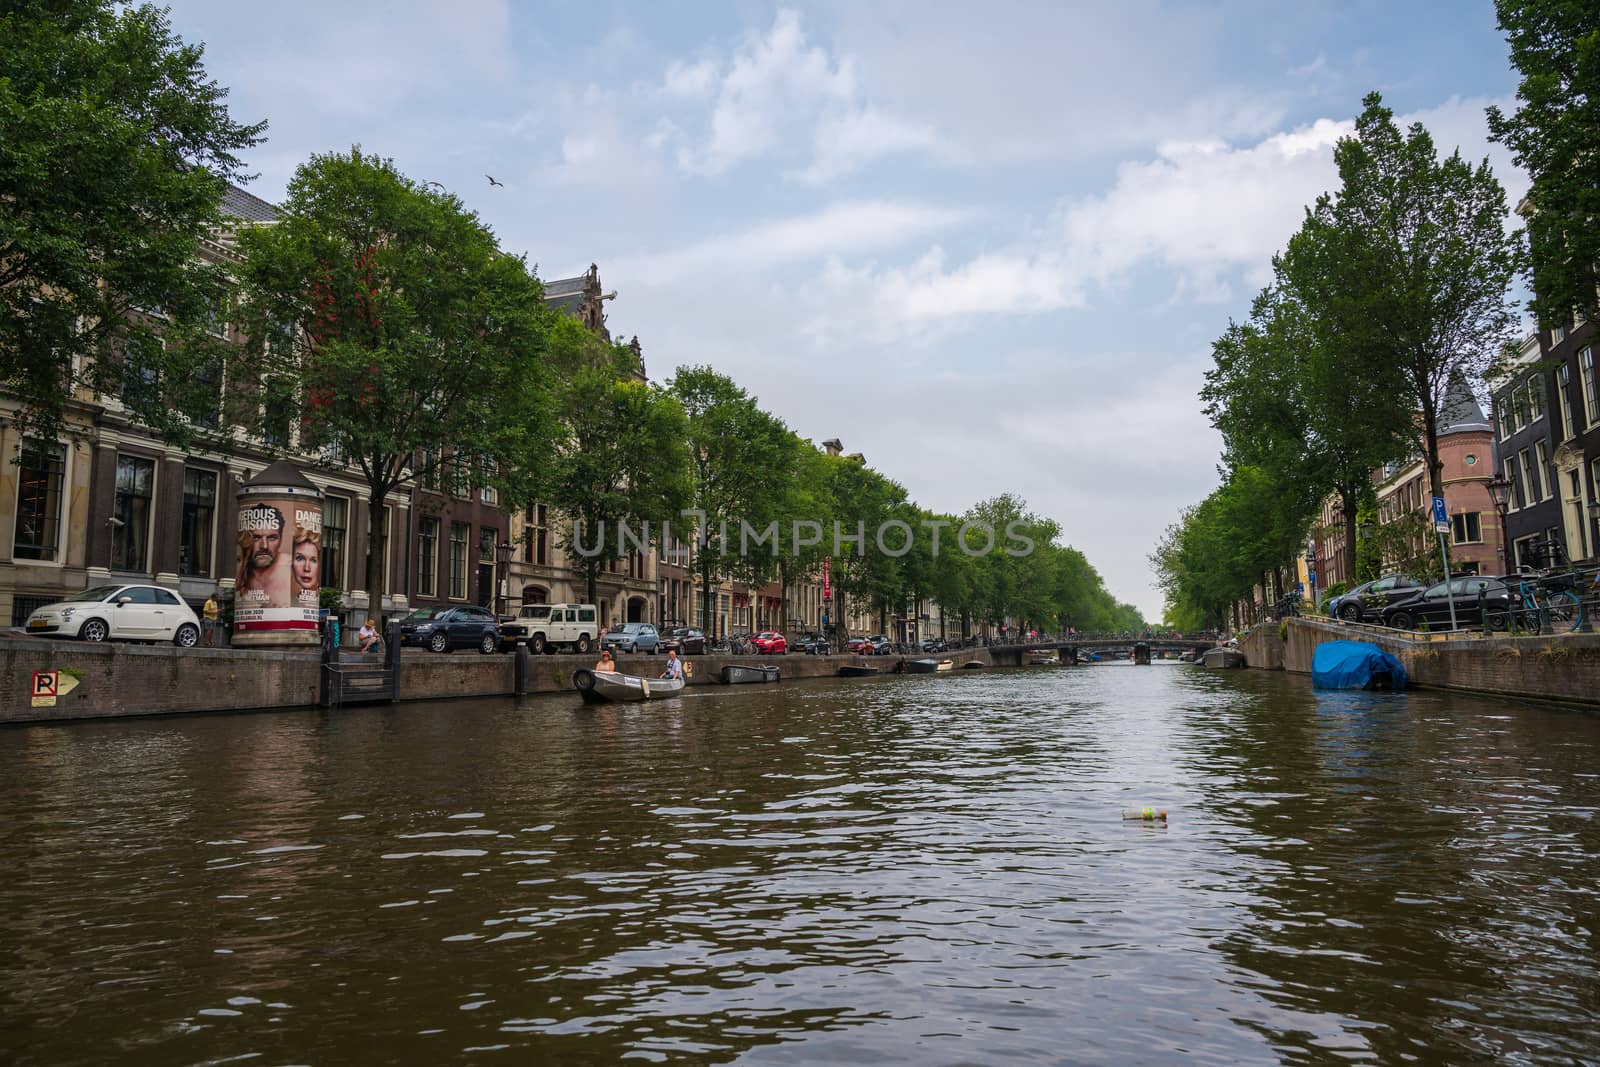 Amsterdam, the Netherlands — July 28, 2019. A wide angle photo looking down one of Amsterdam's canals